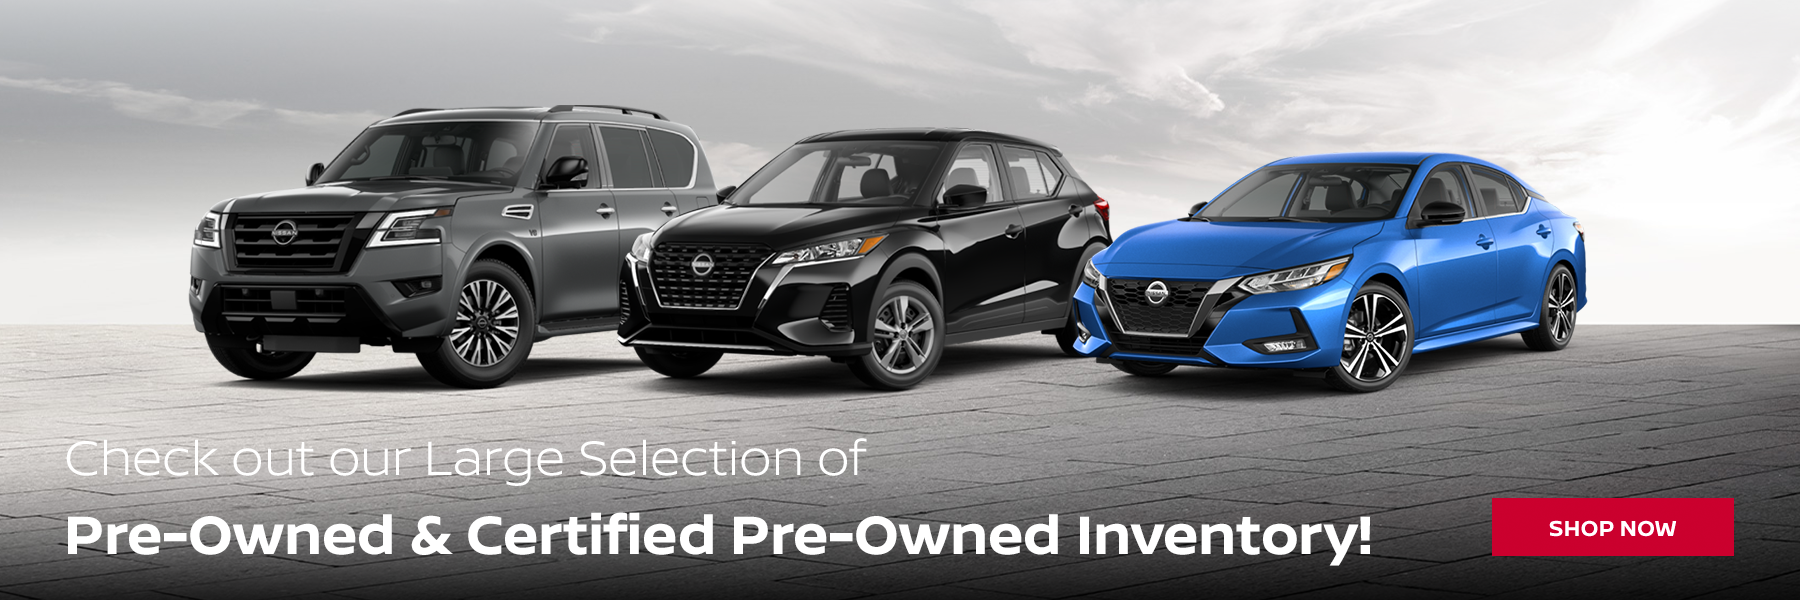 All Pre-Owned Vehicles